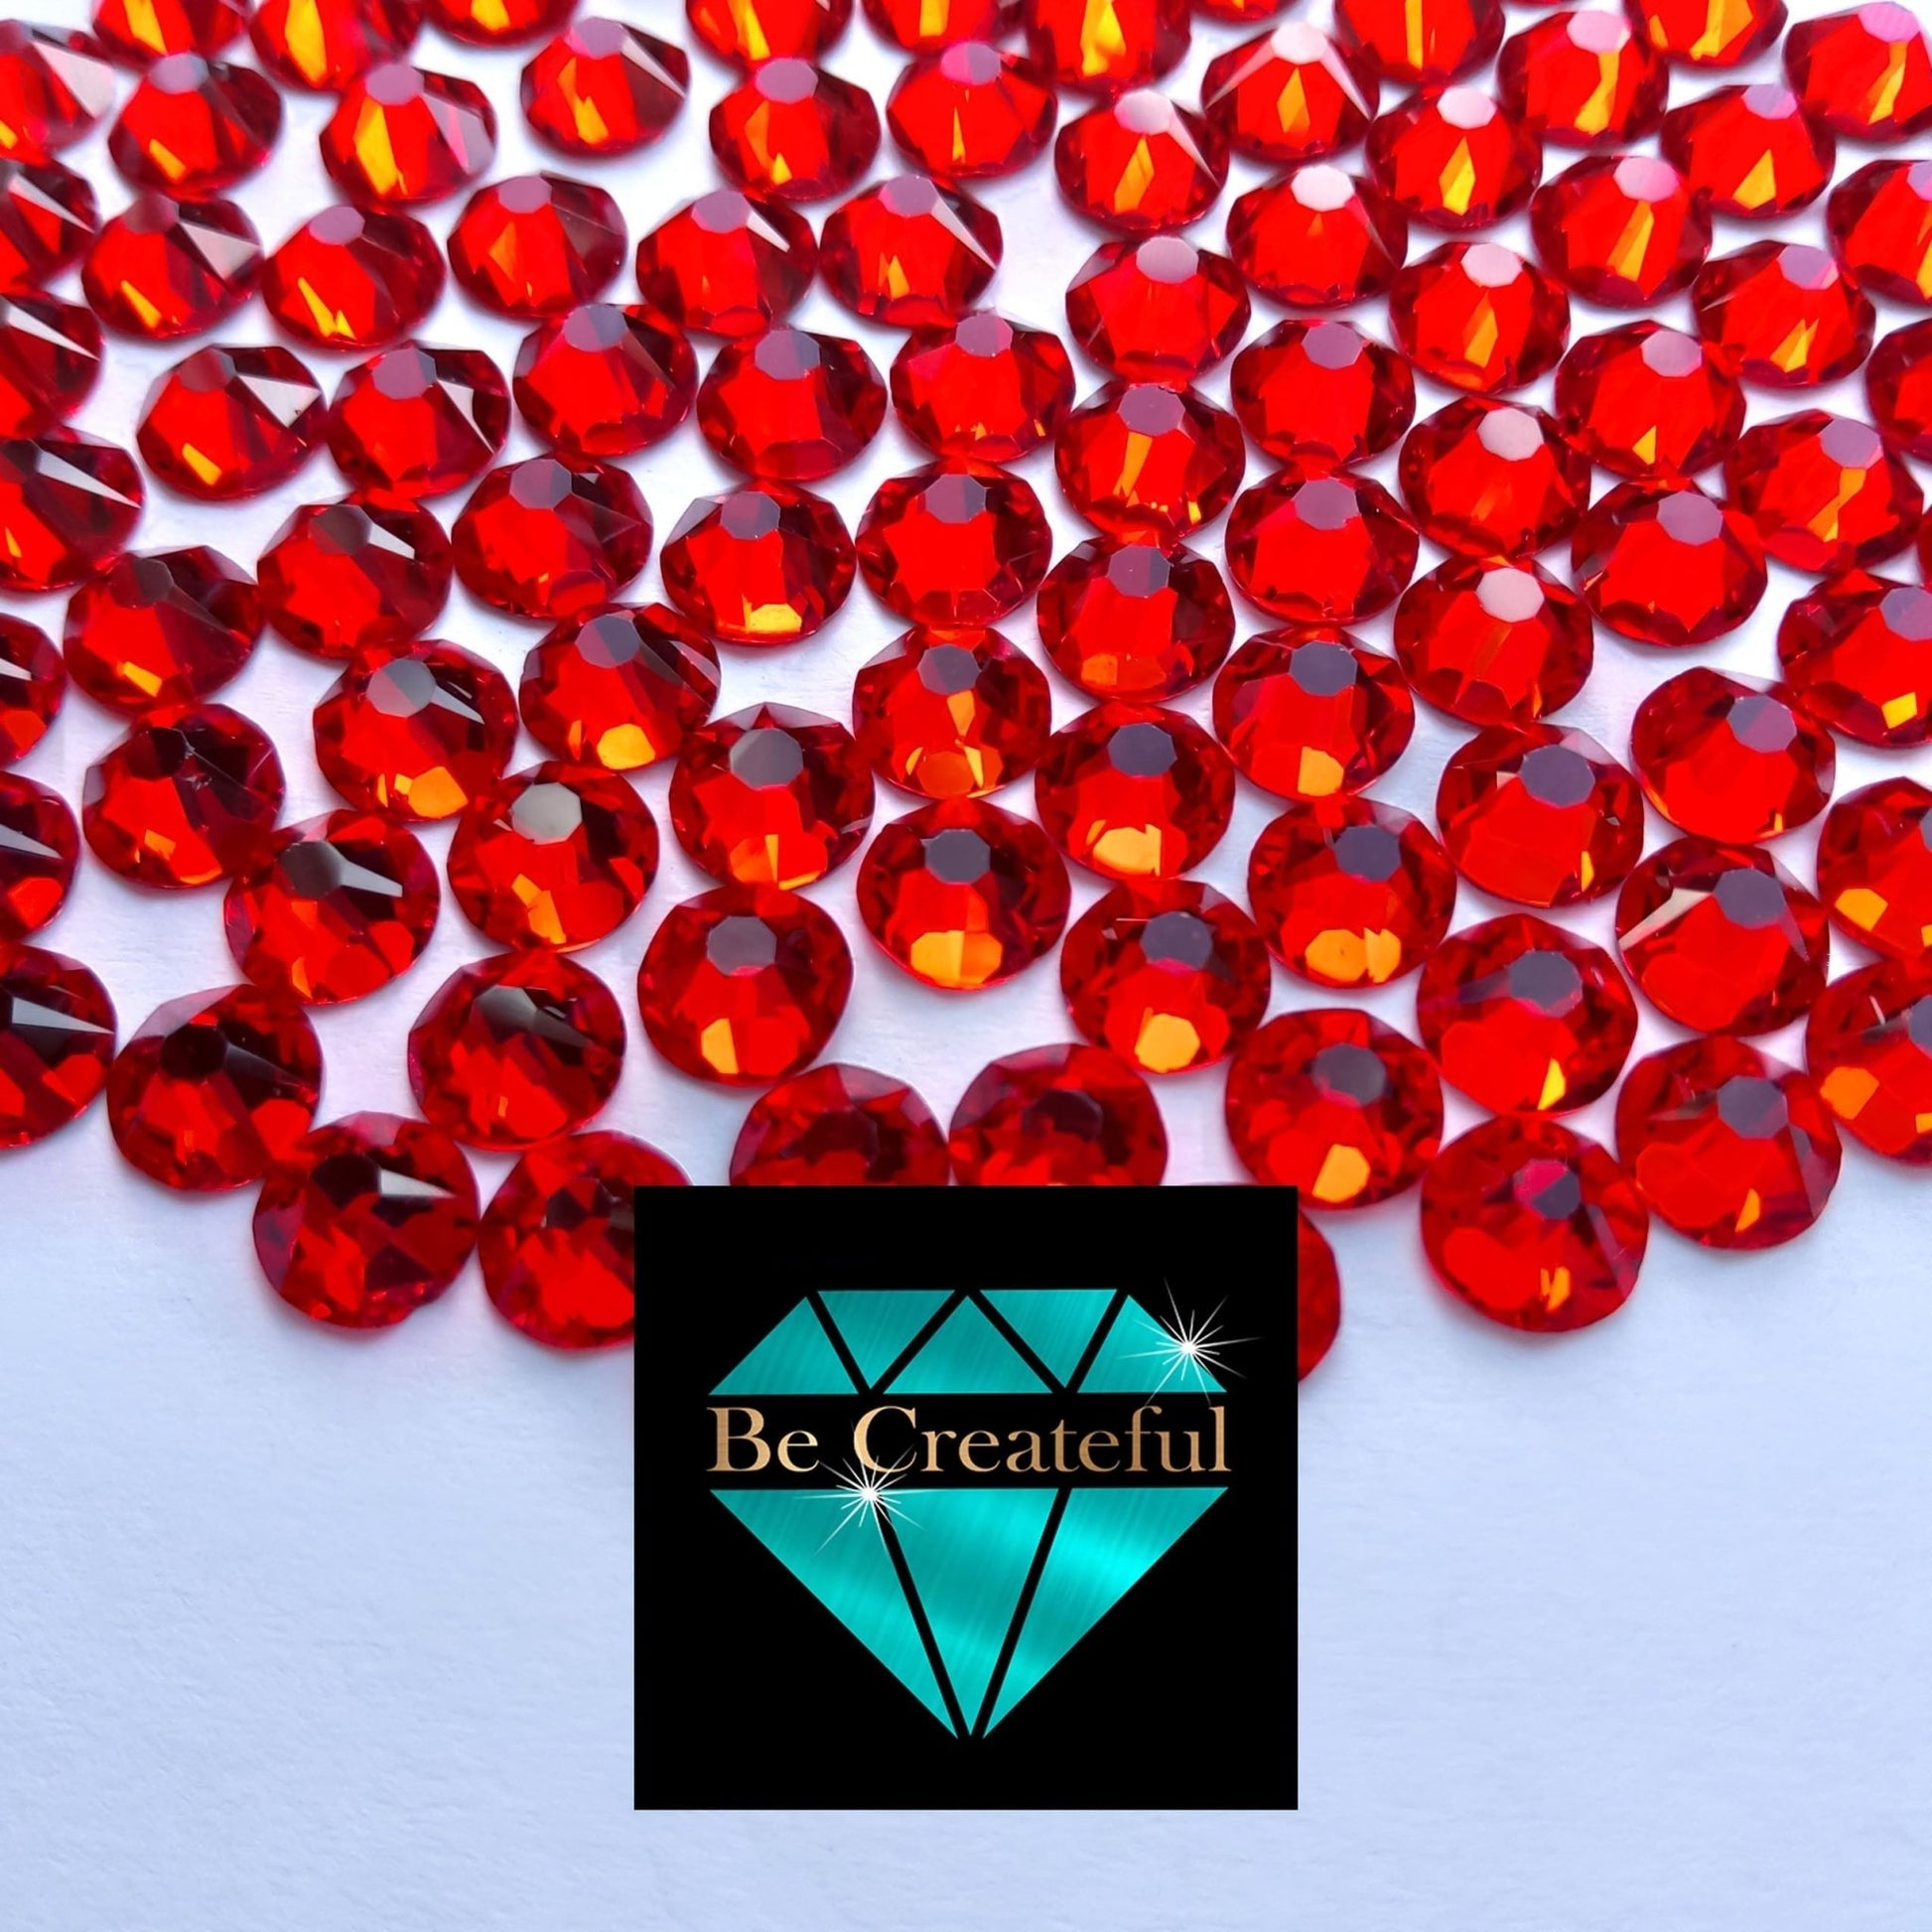 LUXE Light Siam Red Hotfix Rhinestones are high-quality 16 facet glass Rhinestone with intense sparkle and refraction